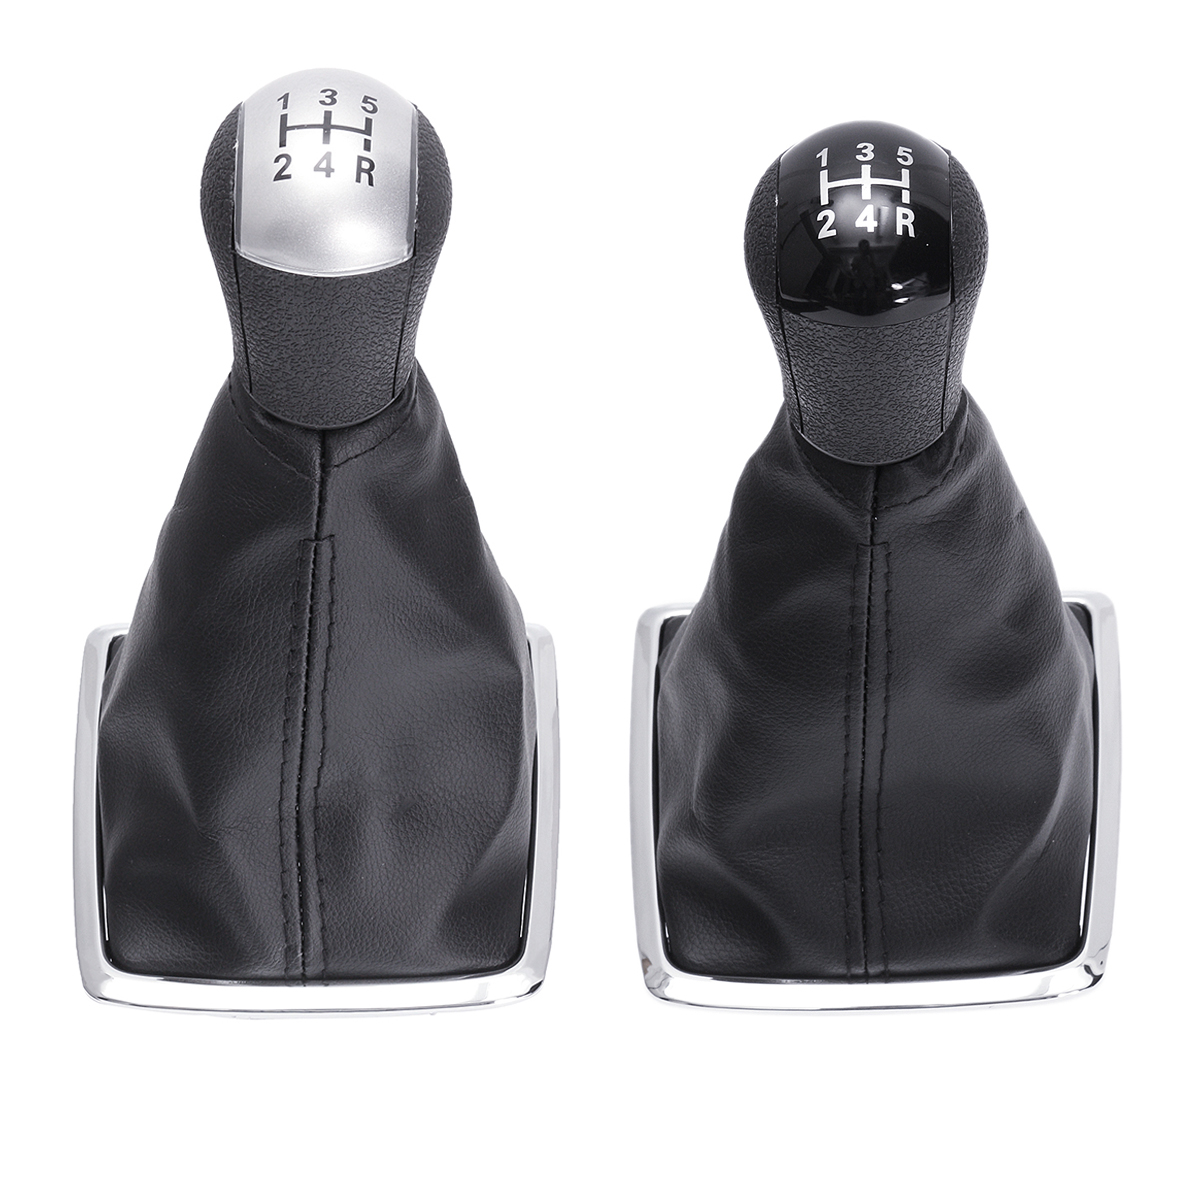 5 Speed Gear Shift Knob Stick Lever Gear Shift Cover for Ford Focus MK II 05-08 - Auto GoShop